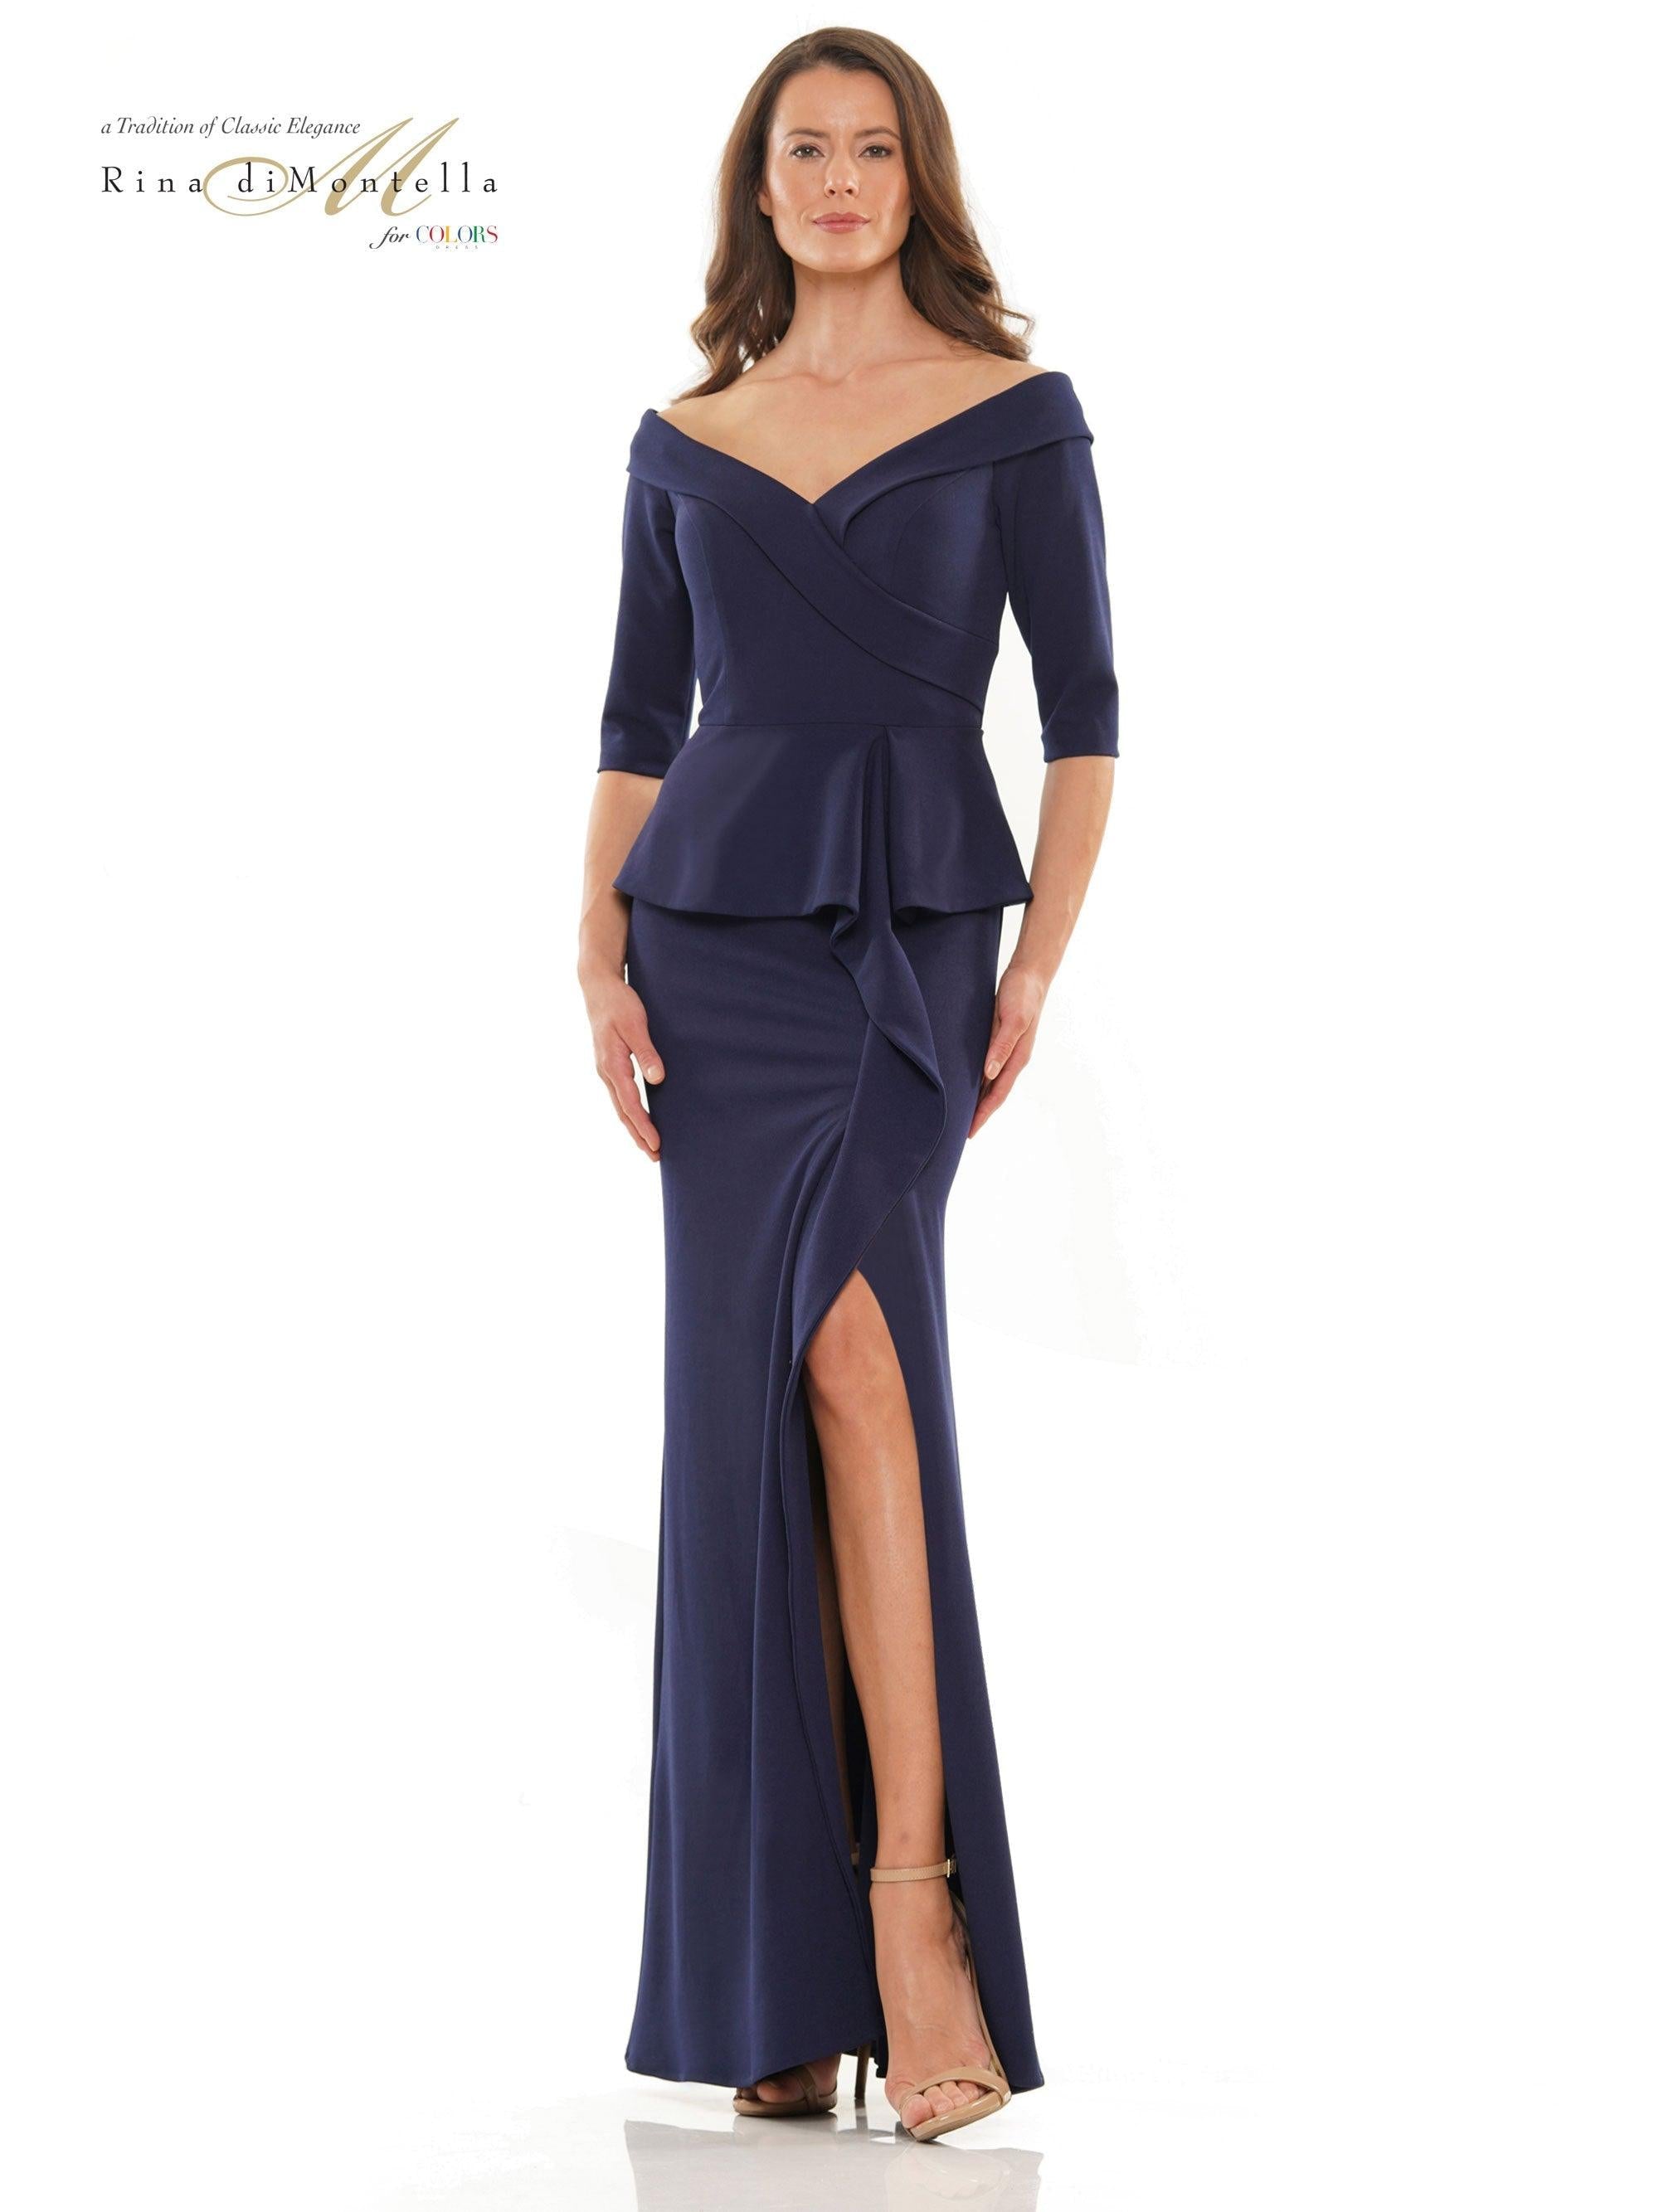 Rina di Montella Mother of the Bride Long Gown 2764 - The Dress Outlet